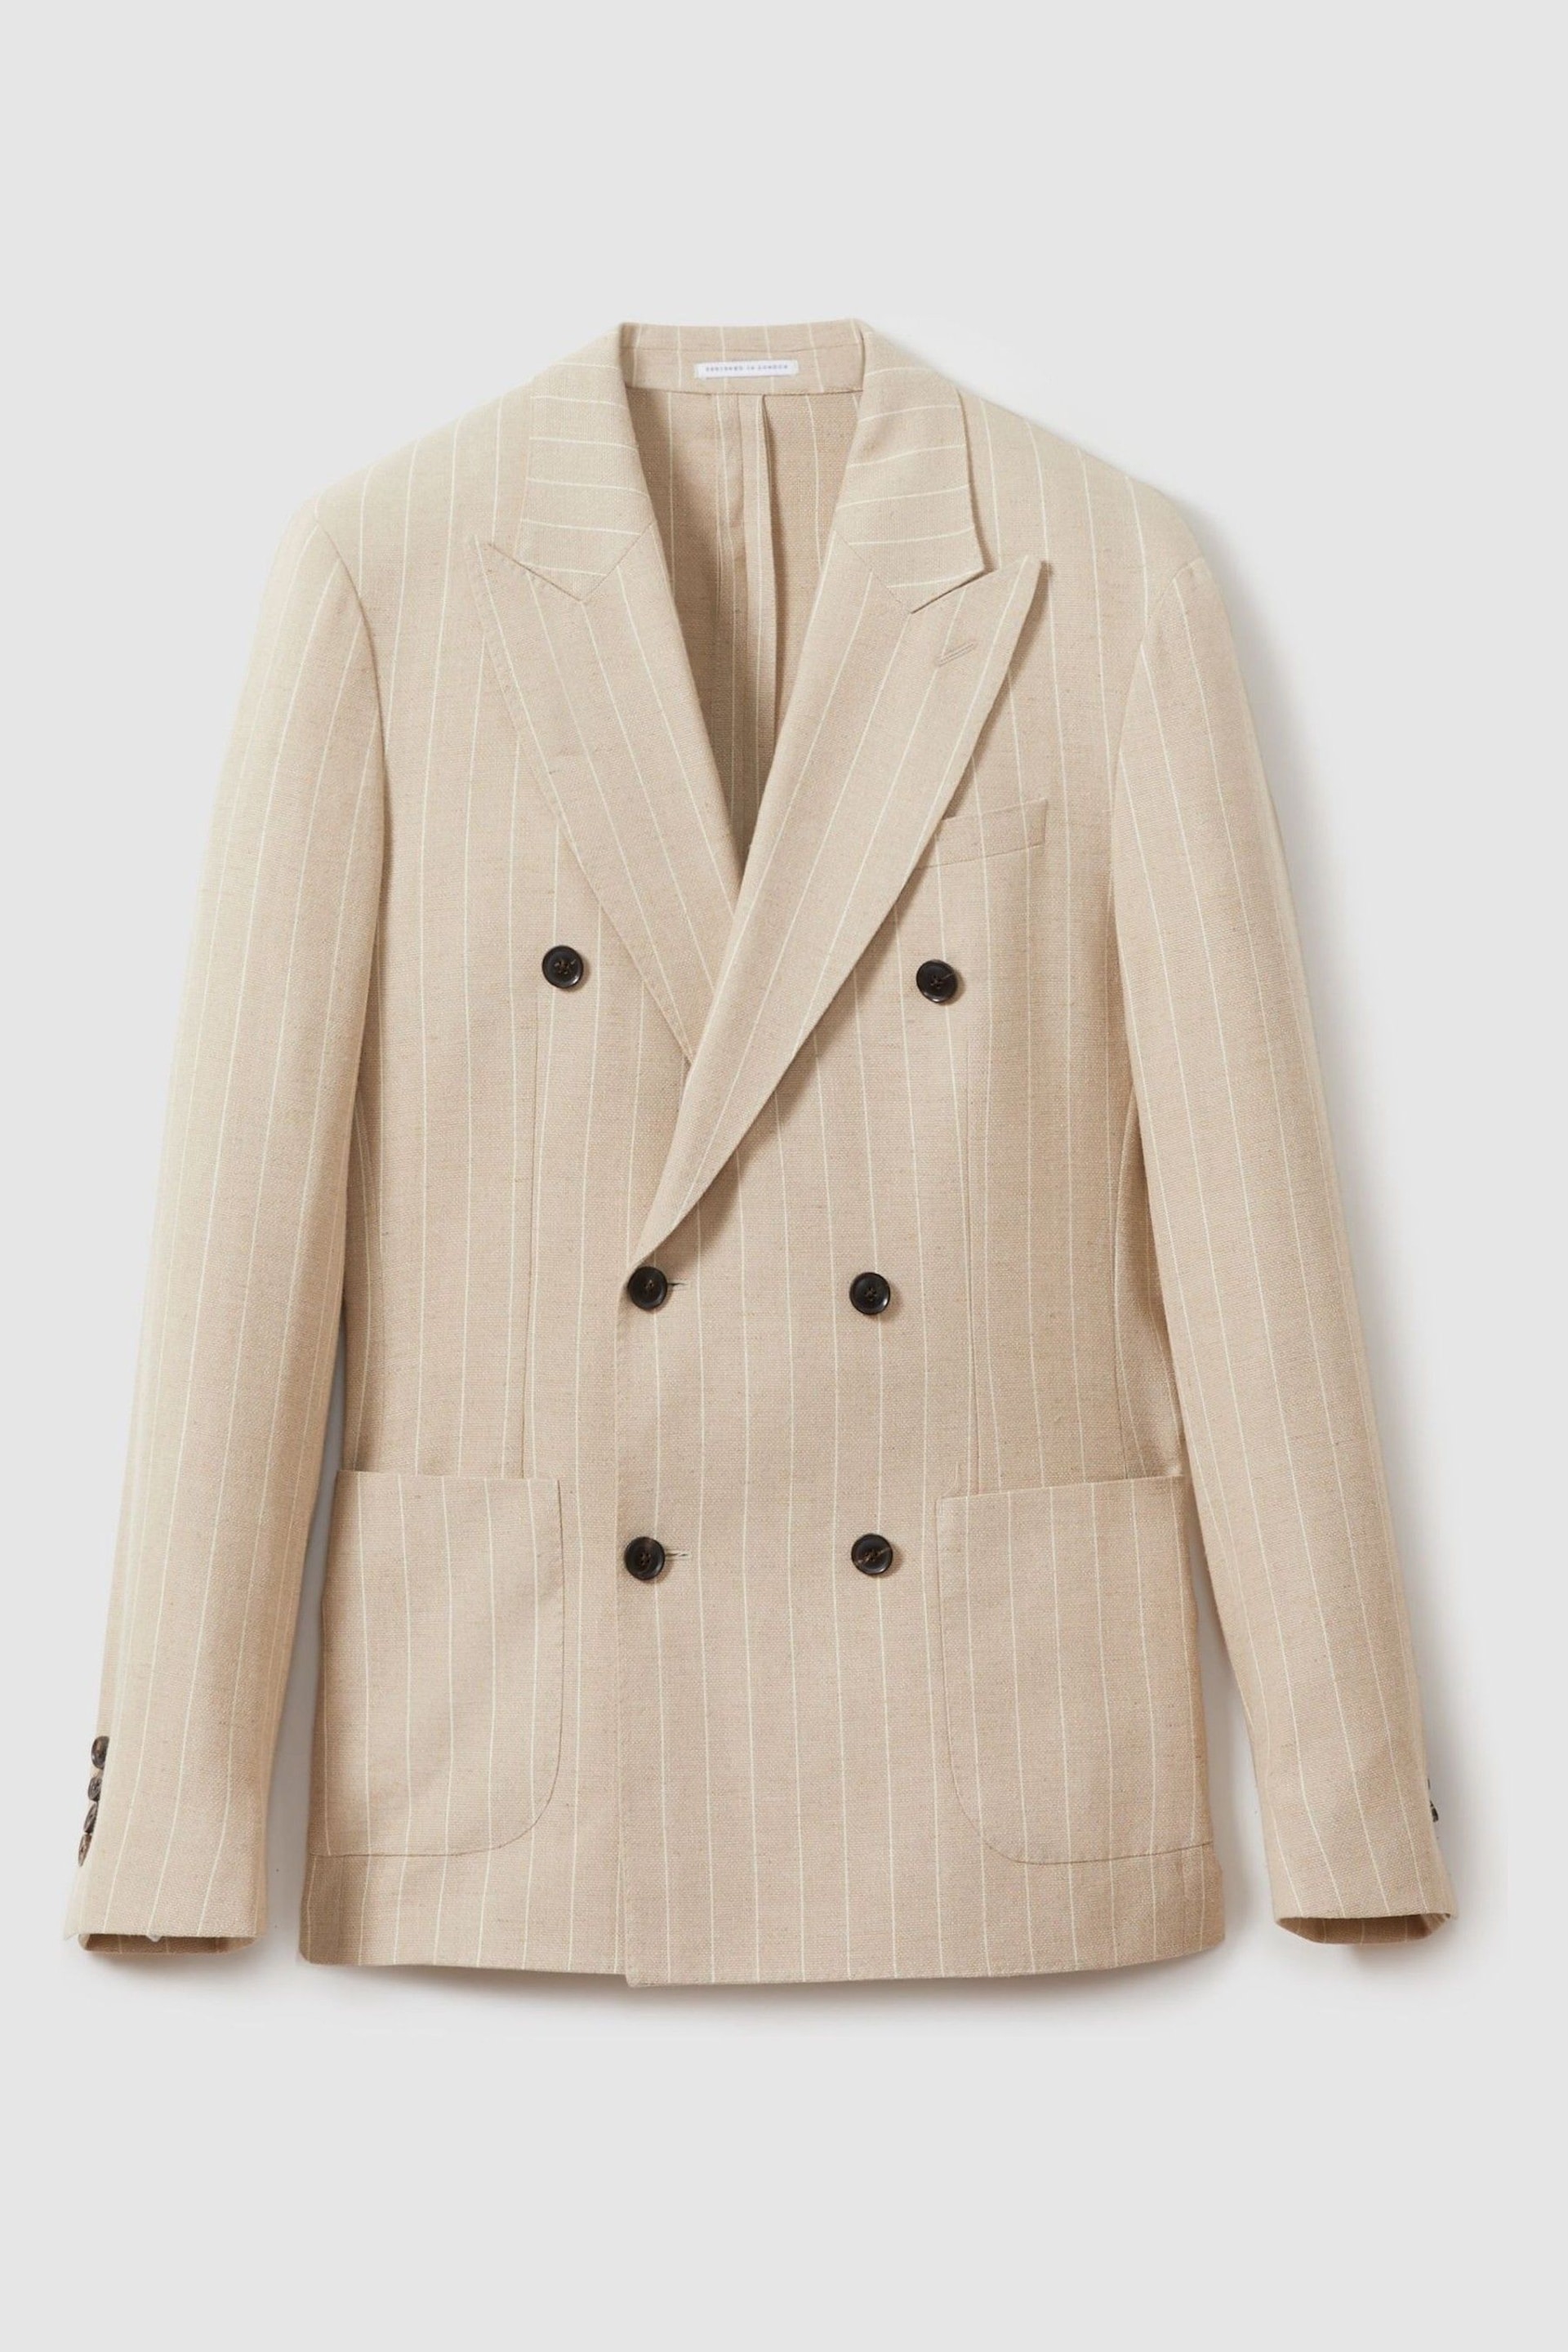 Reiss Oatmeal Jeremiah Slim Fit Double Breasted Striped Blazer - Image 2 of 7